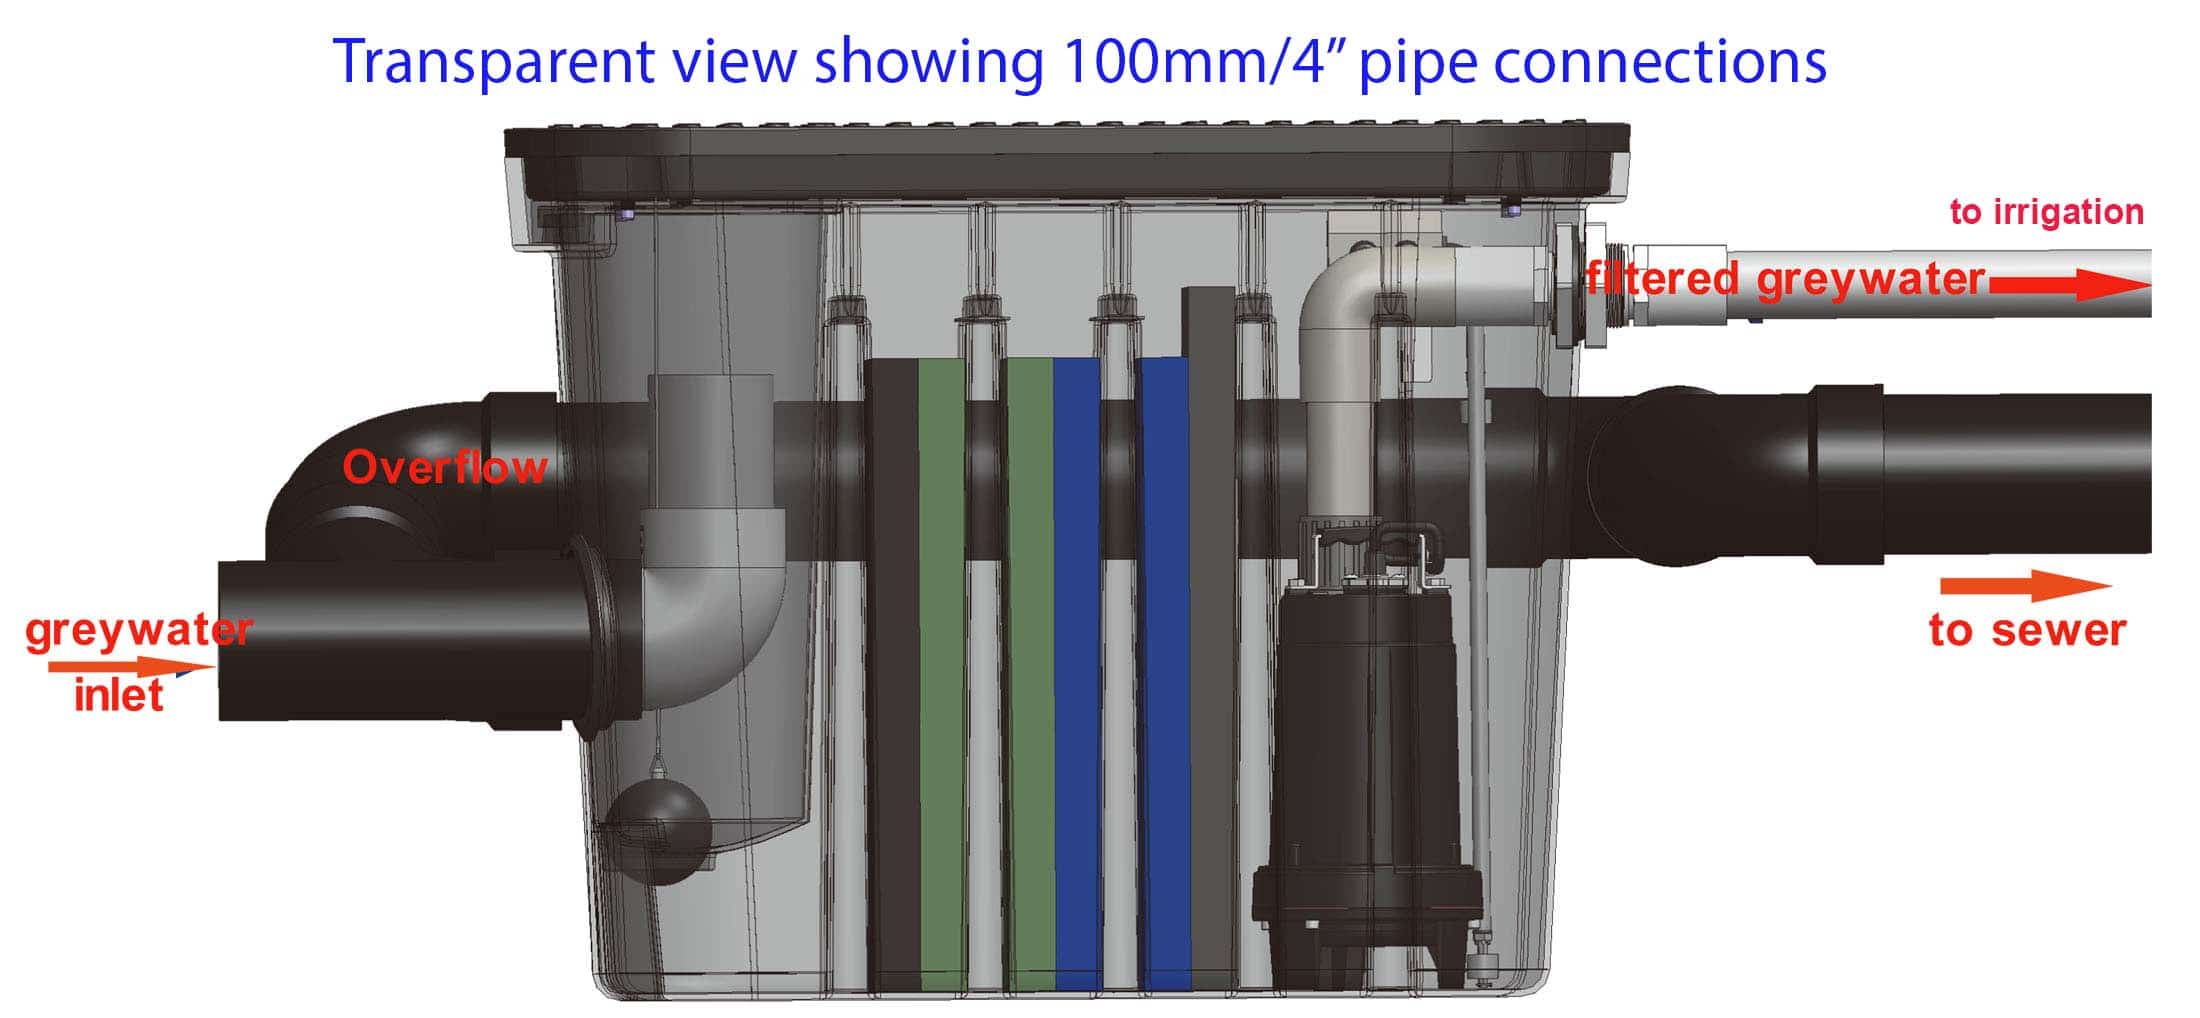 Schematic showing transparent view of WaterMate Greywater Recycling Unit pipe connections